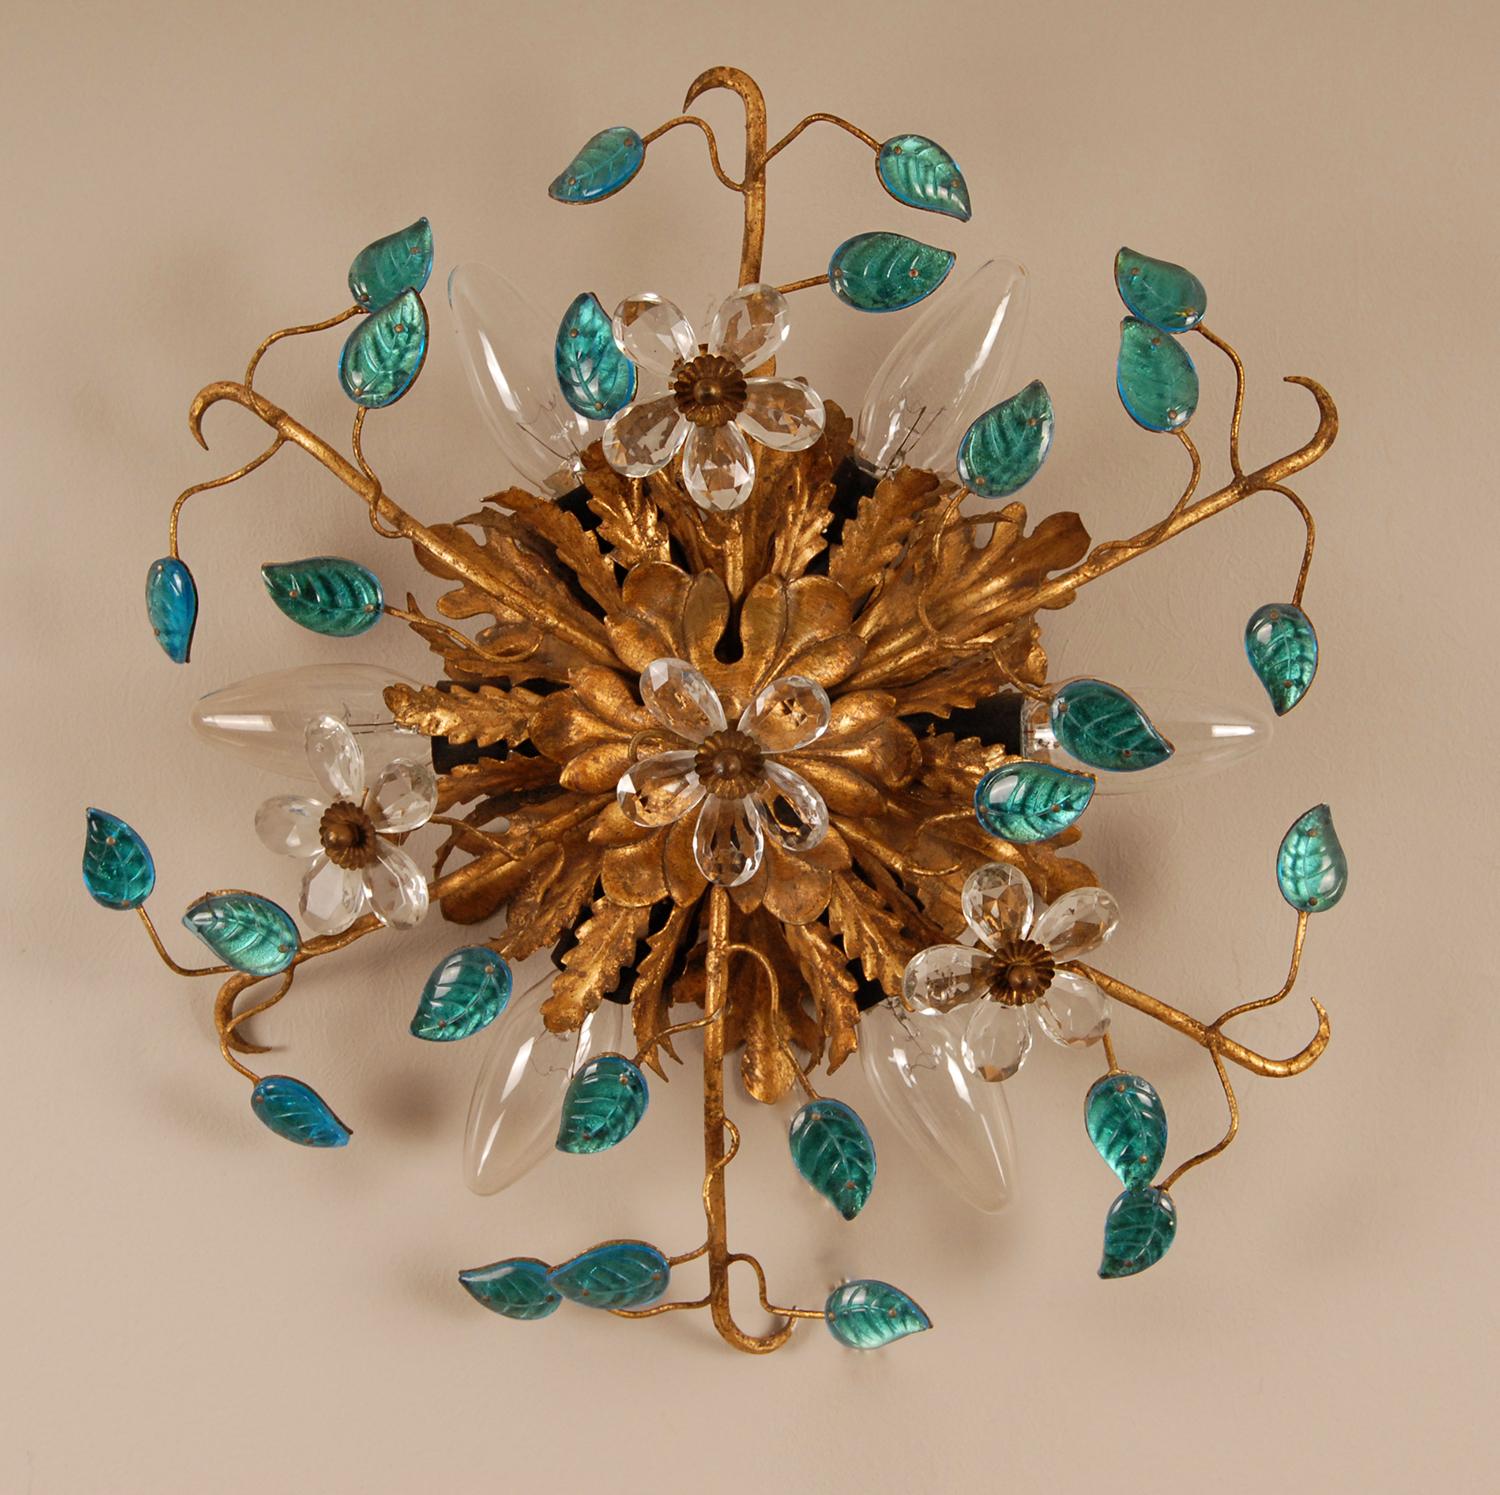 Florentiner ceiling fixture or wall lamp
Distressed gilt cast iron frame with Venice Murano Turquoise glass leafs and Bohemian clear crystal flowers
Origin Italy Florence 1970 - 1979
To be dated 20th century
Attributed to Banci Firenze, known